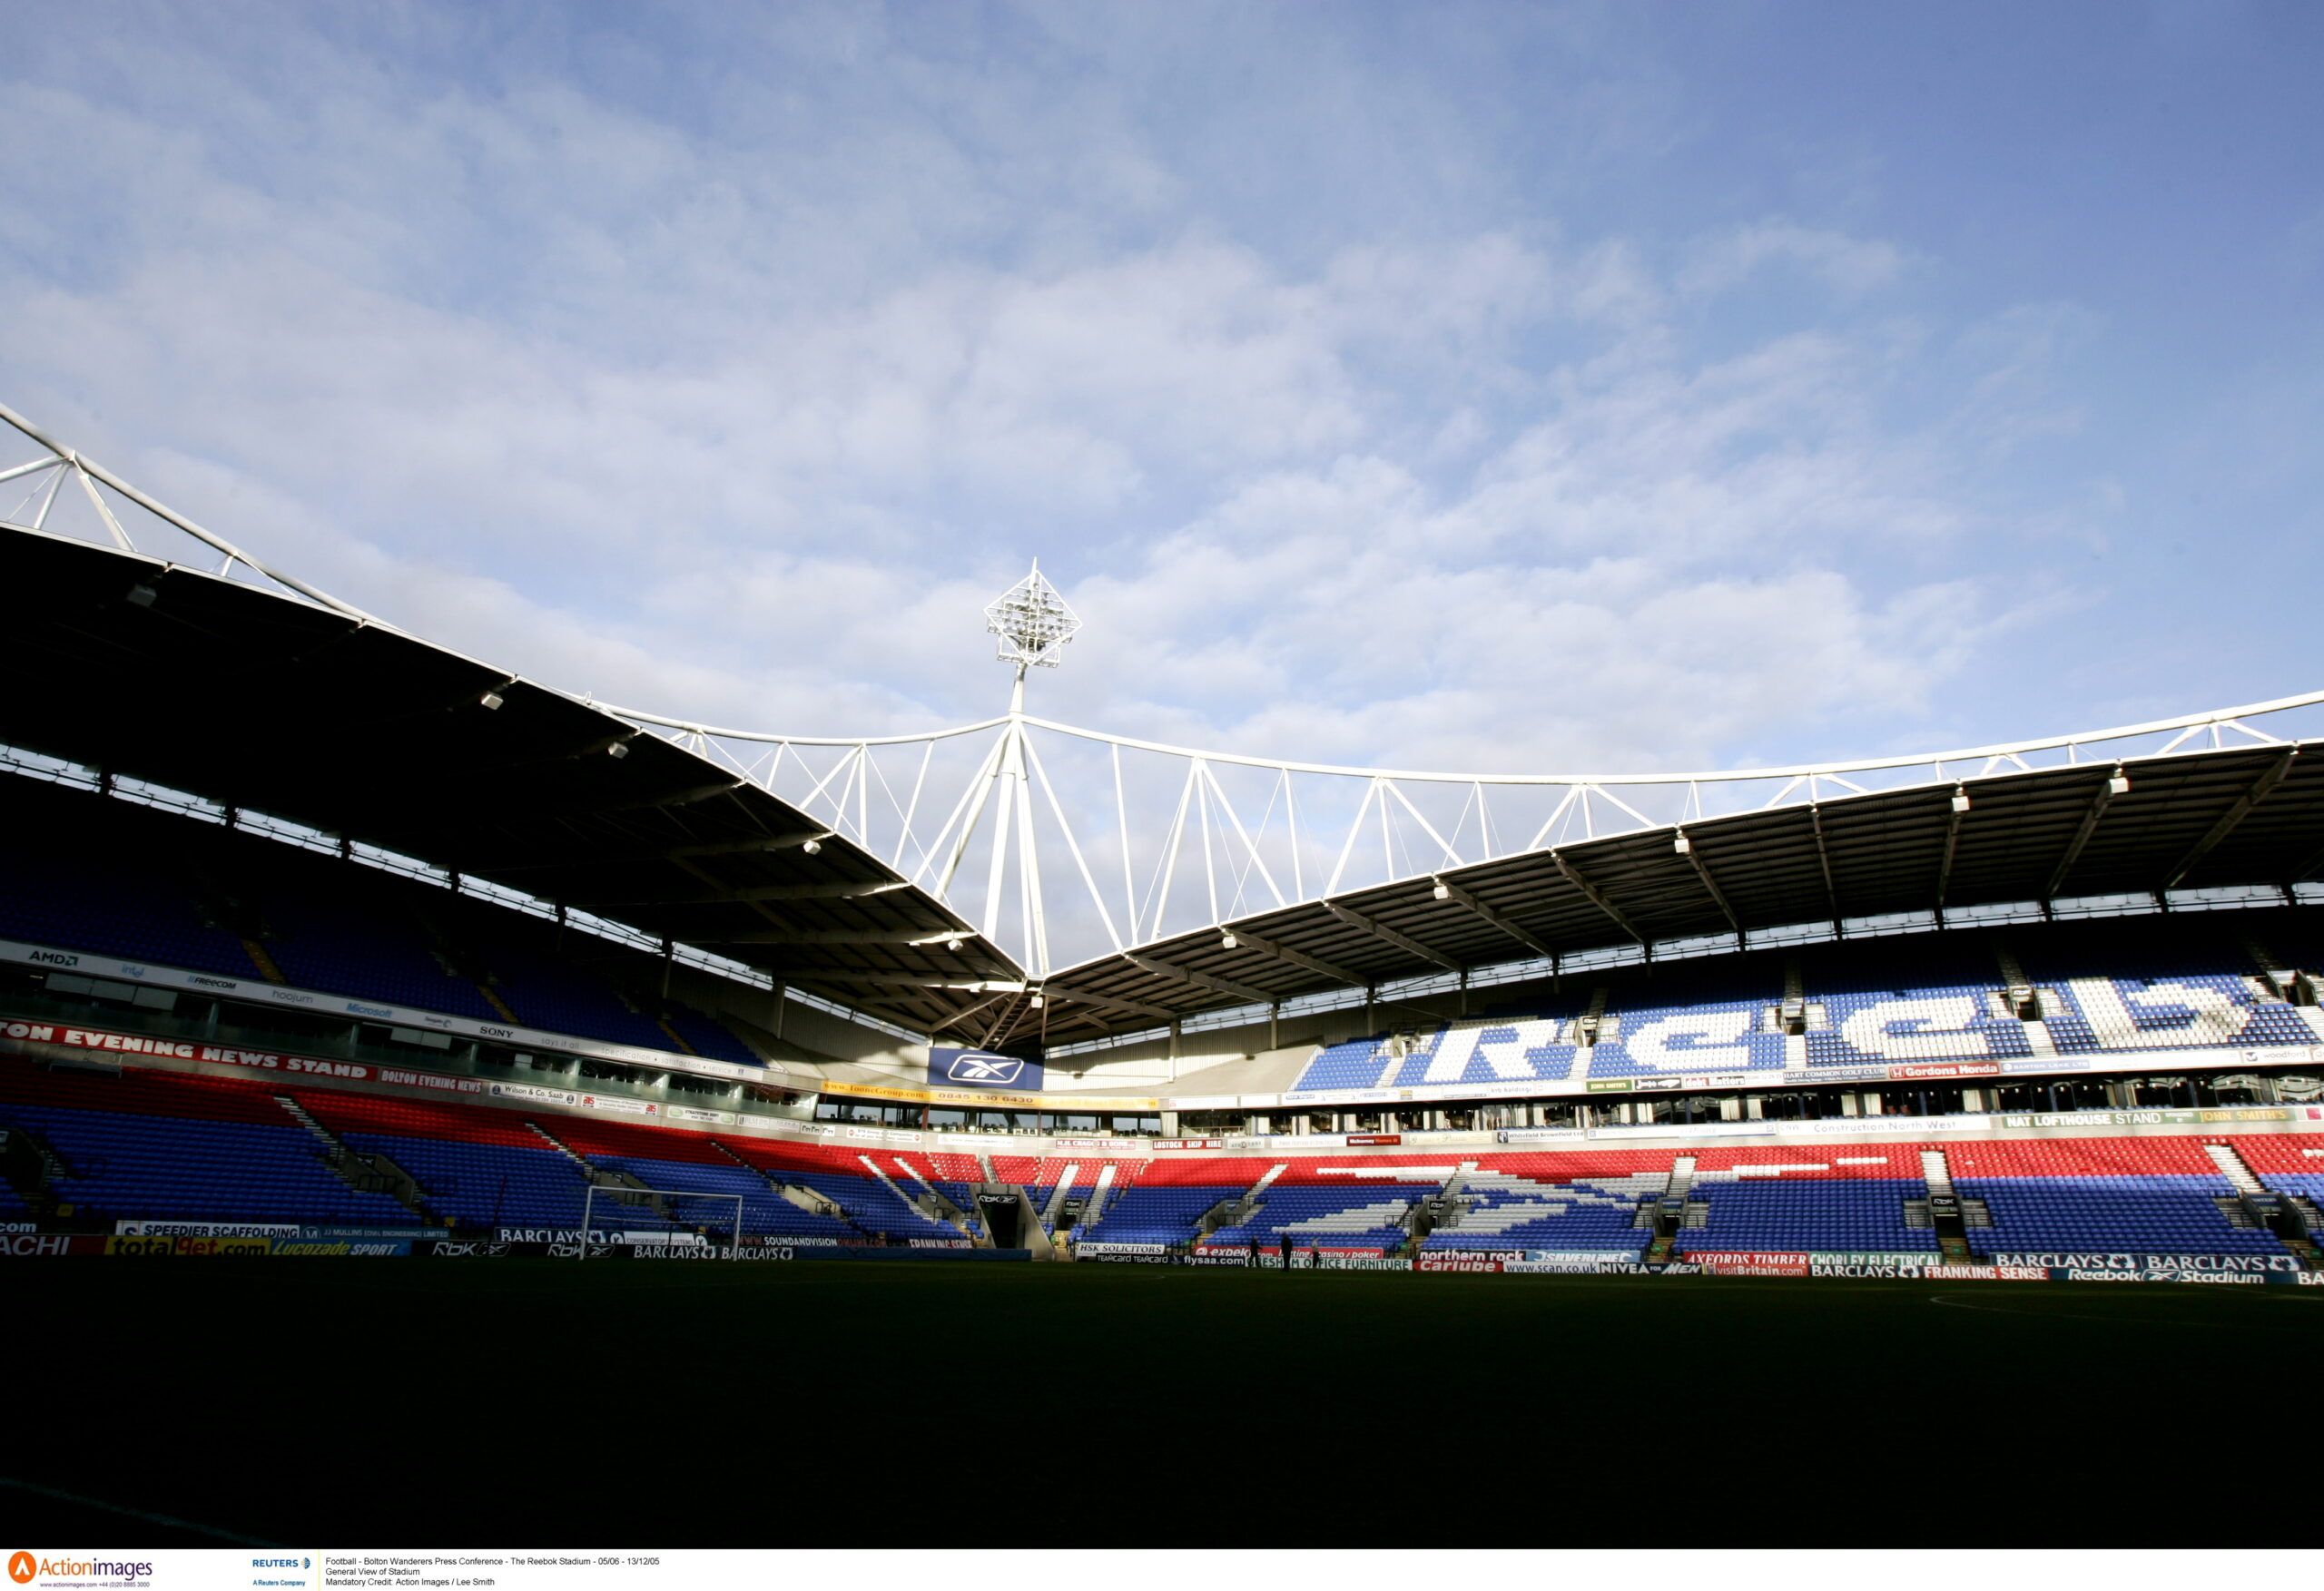 Football - Bolton Wanderers Press Conference - The Reebok Stadium - 05/06 - 13/12/05 
General View of Stadium 
Mandatory Credit: Action Images / Lee Smith